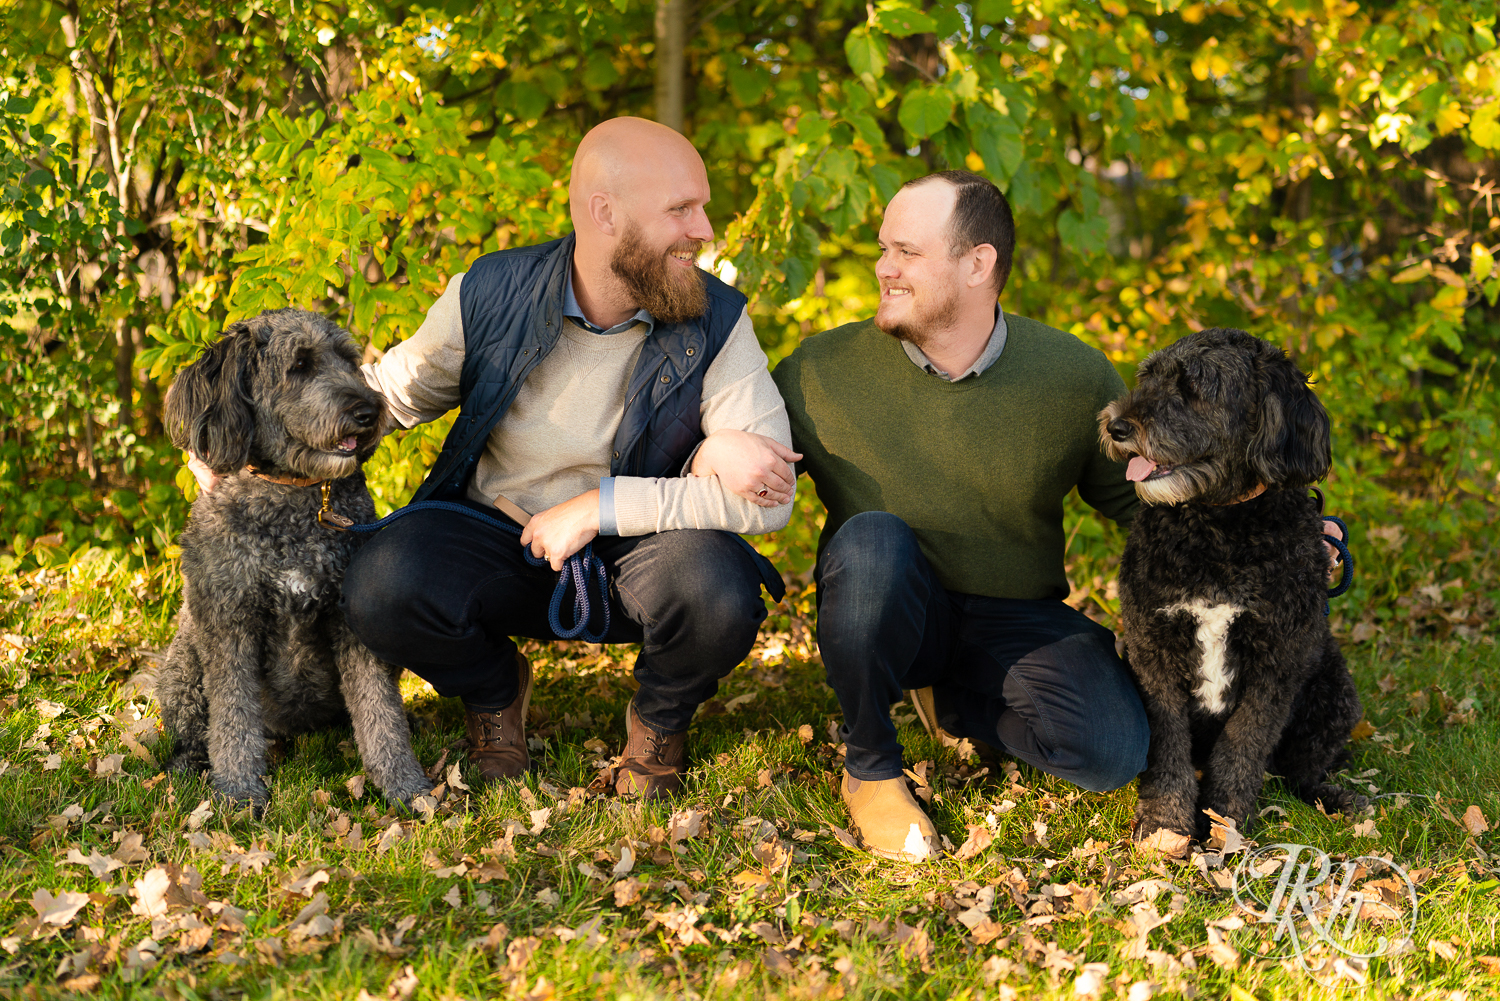 Two gay men laughing and smiling with their Poodles.